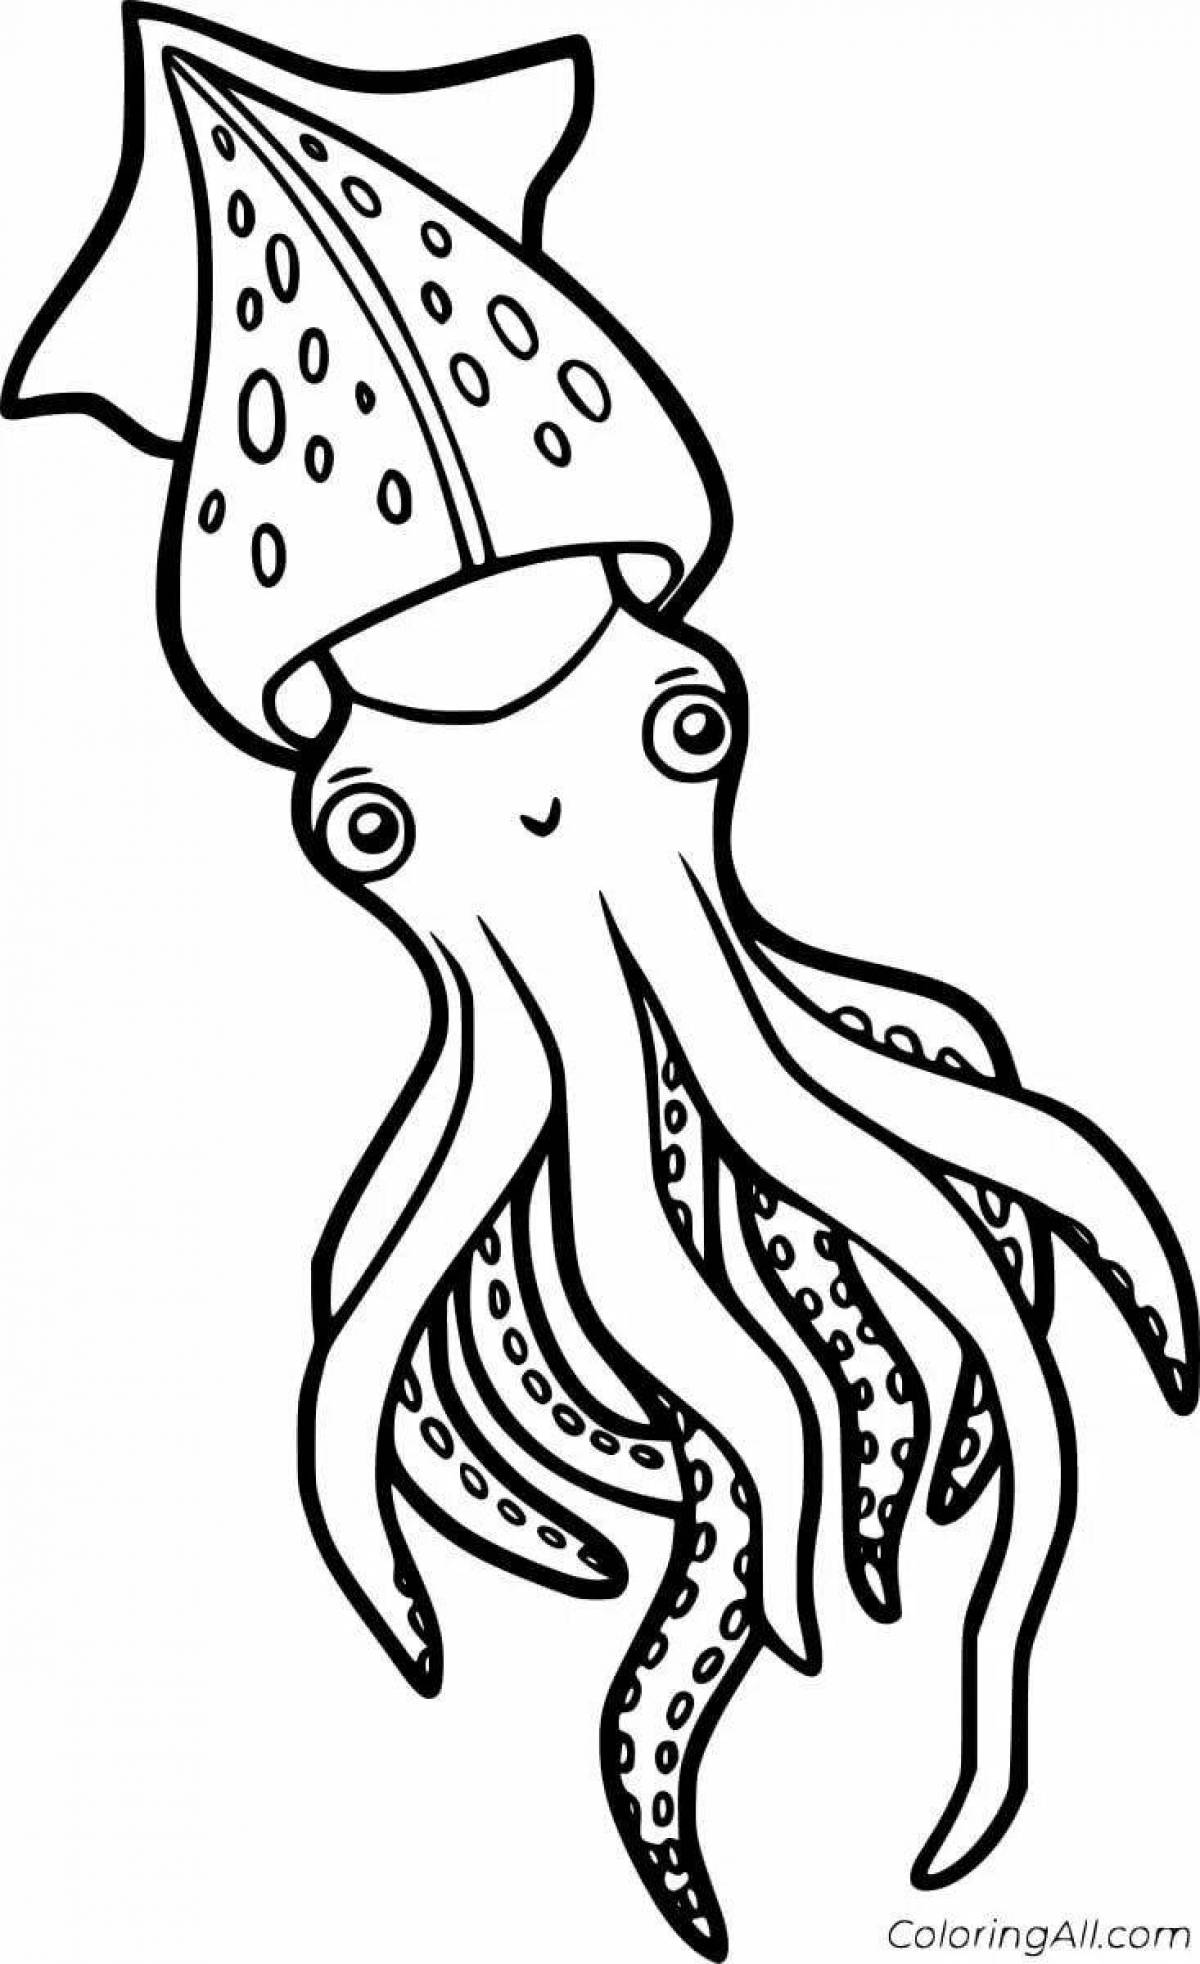 Exciting squid coloring game